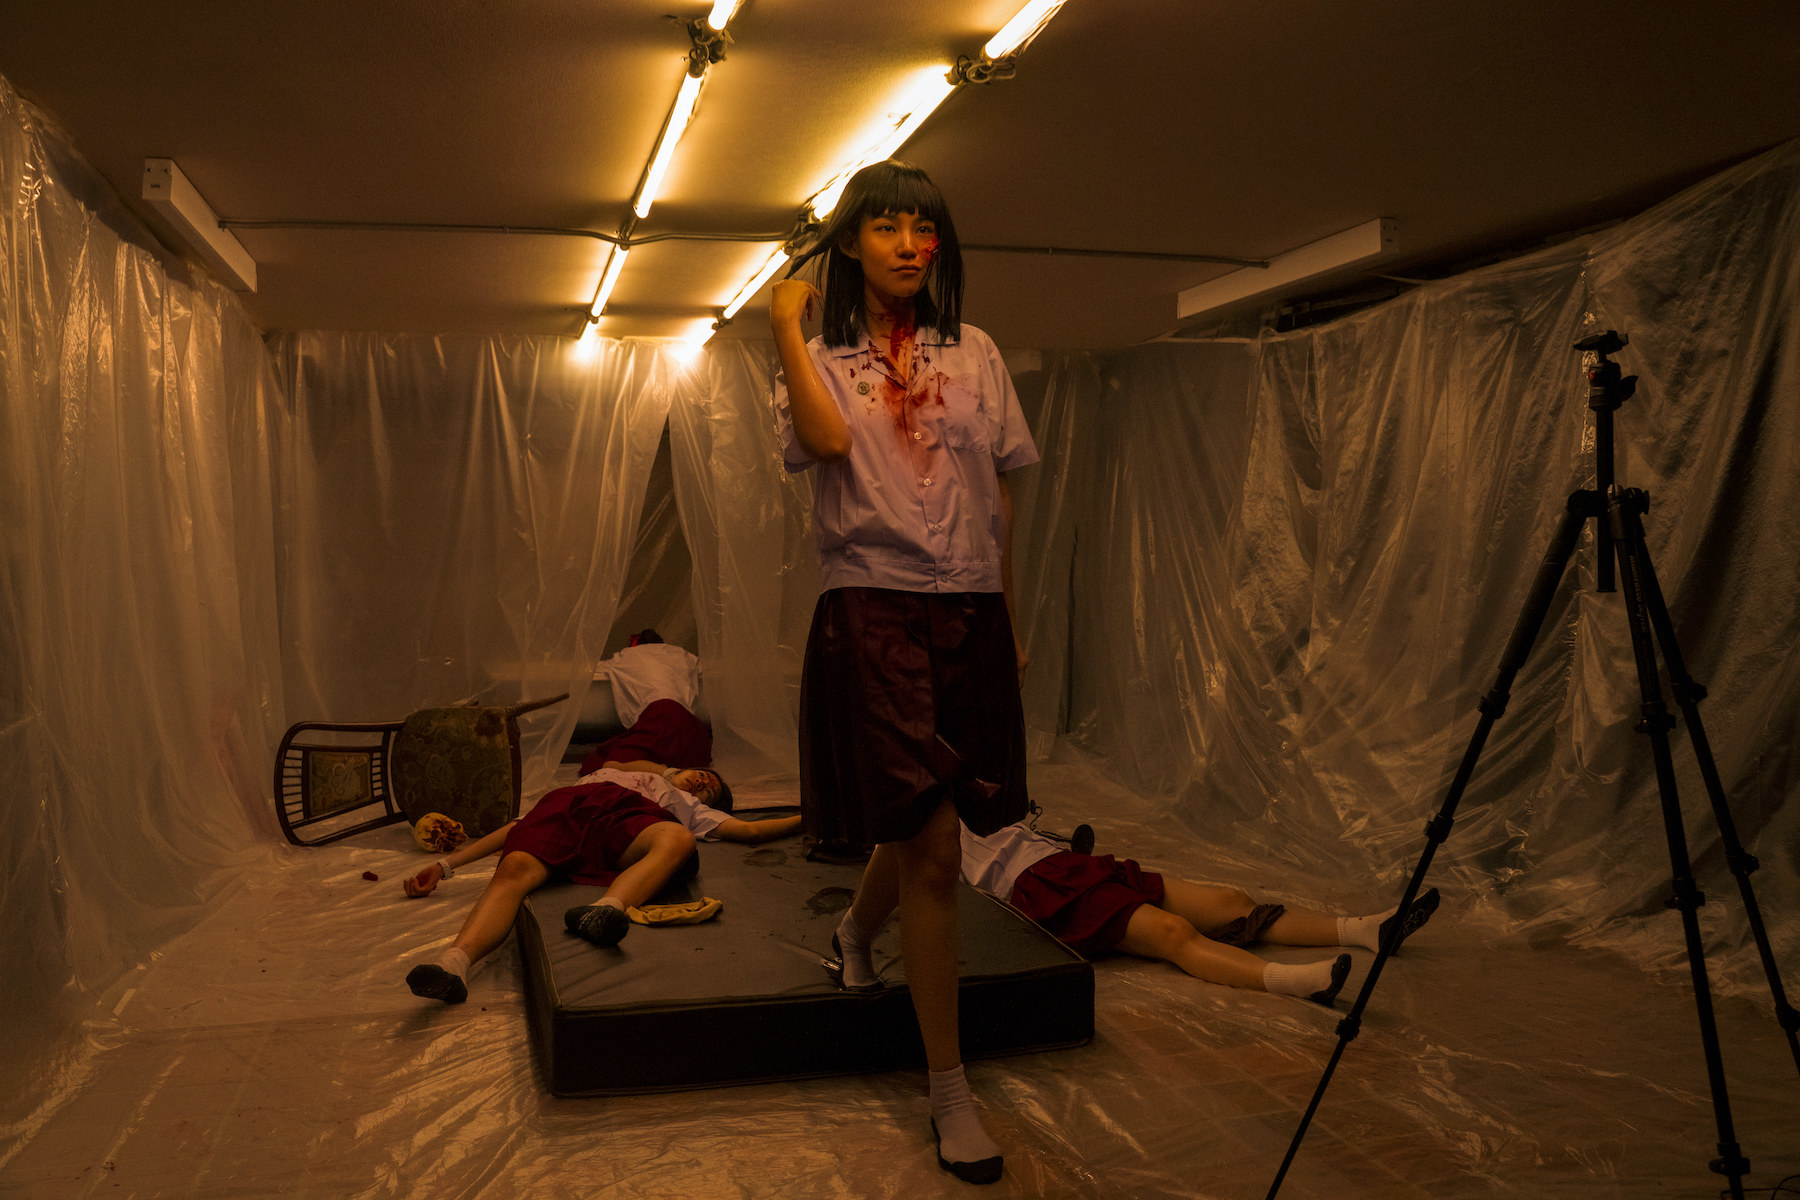 A final girl standing with blood on her face in a creepy, plastic covered room